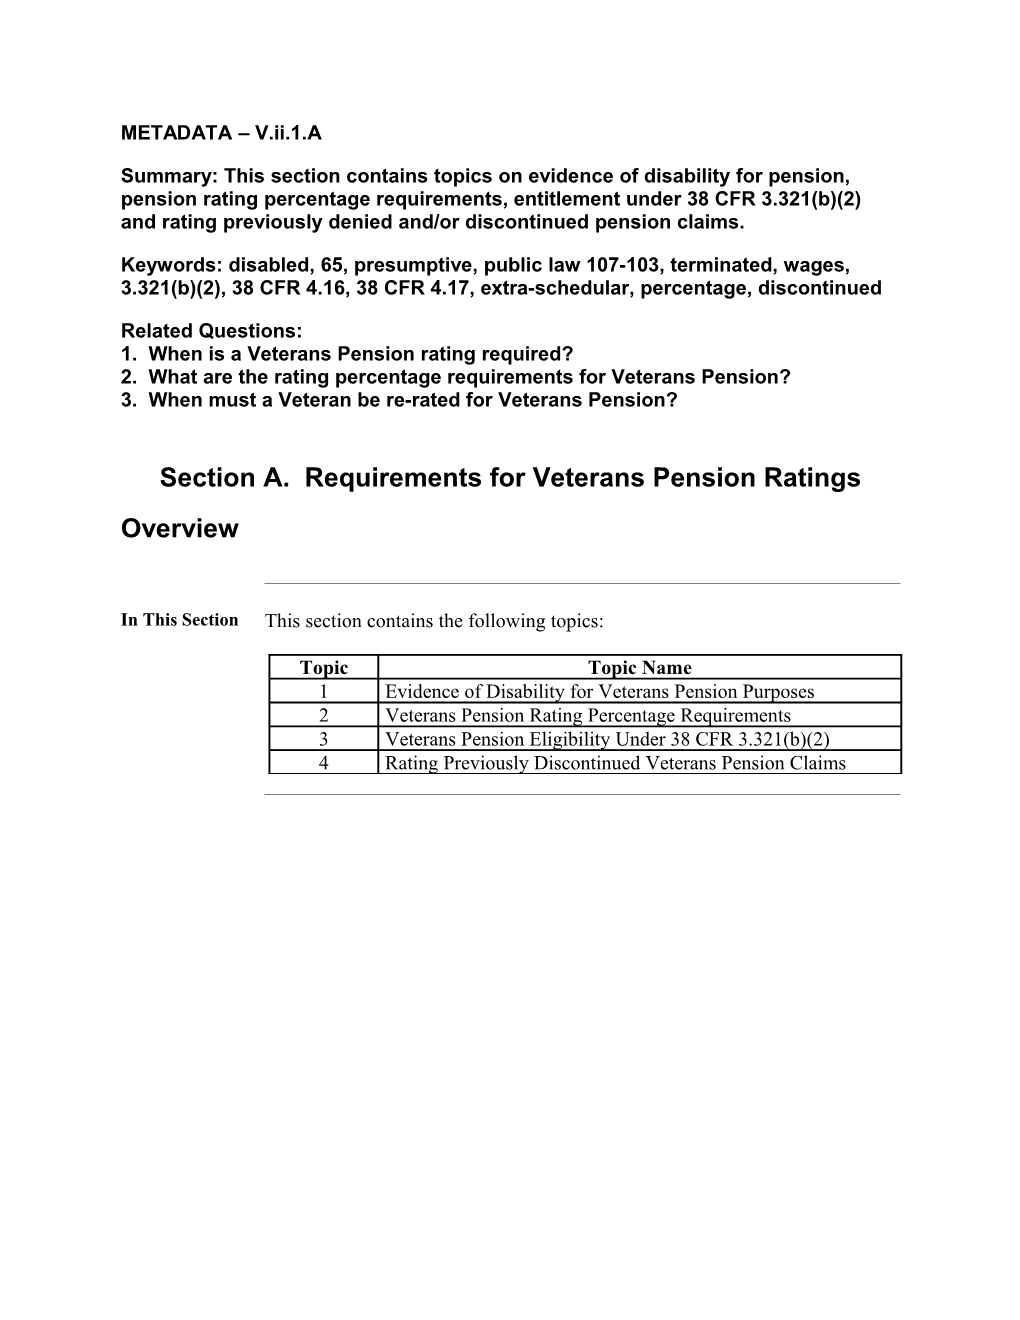 1. When Is a Veterans Pension Rating Required?